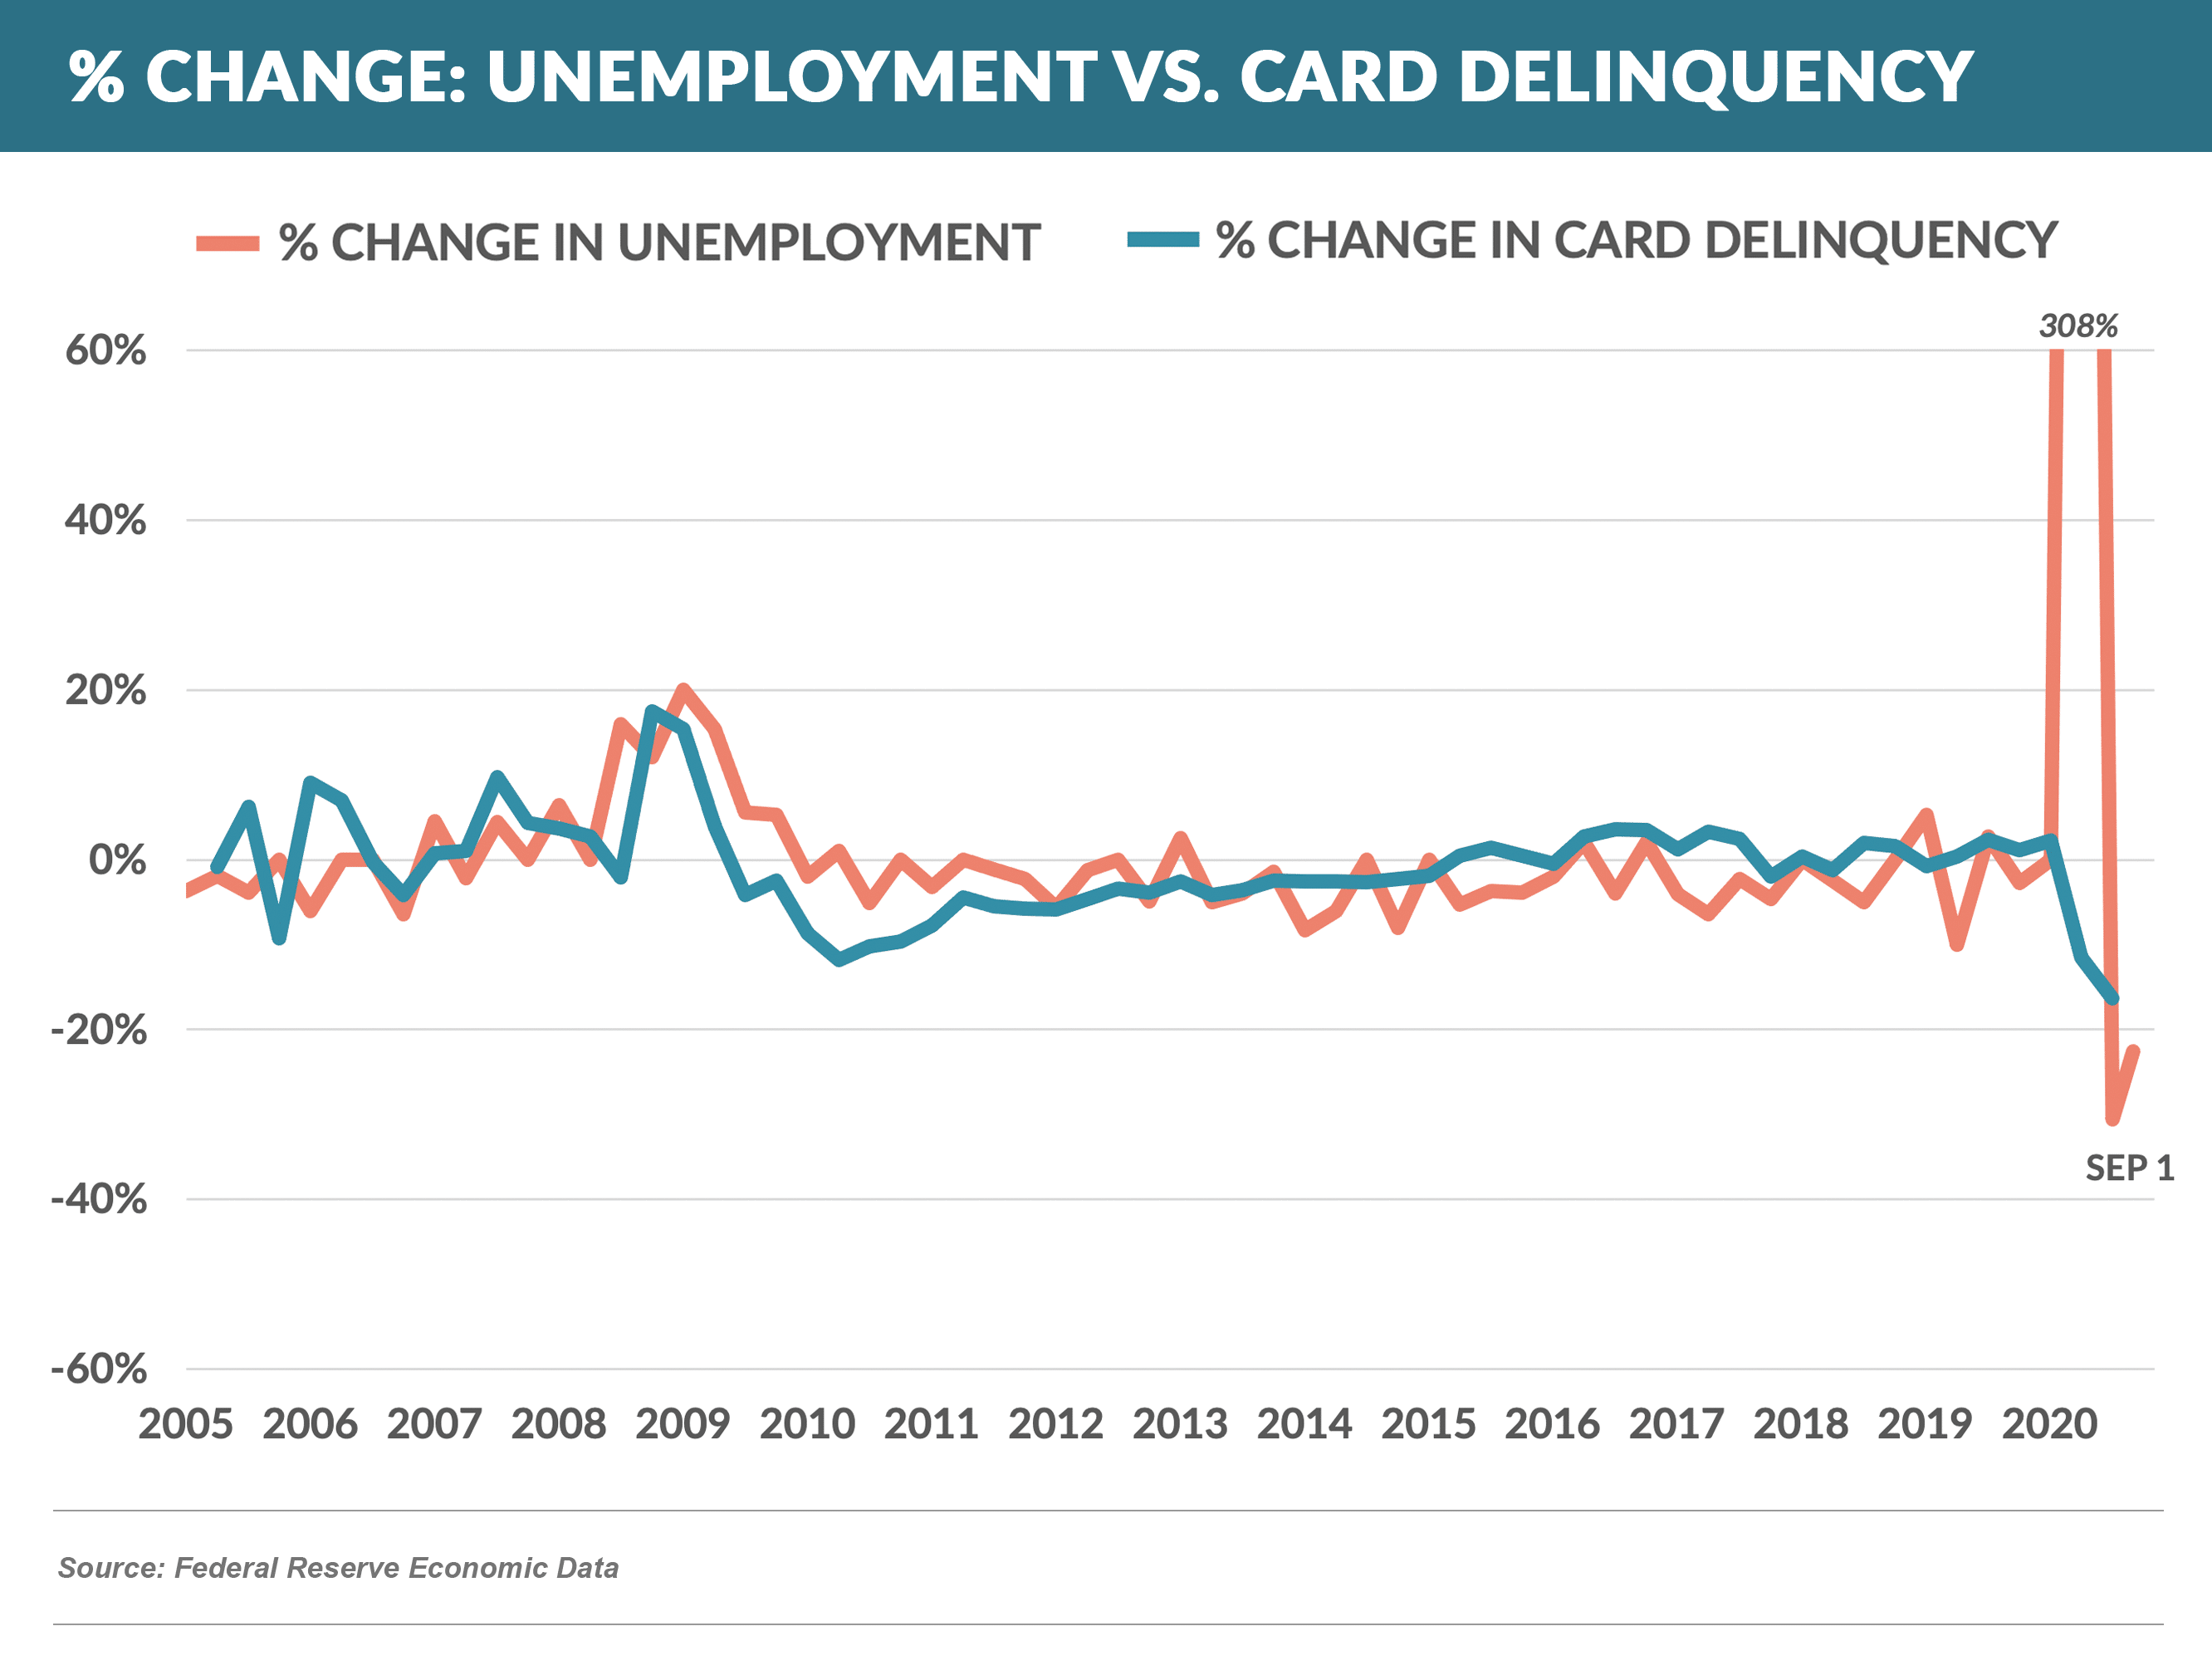 % Change in Unemployment VS Card Delinquency 20200109